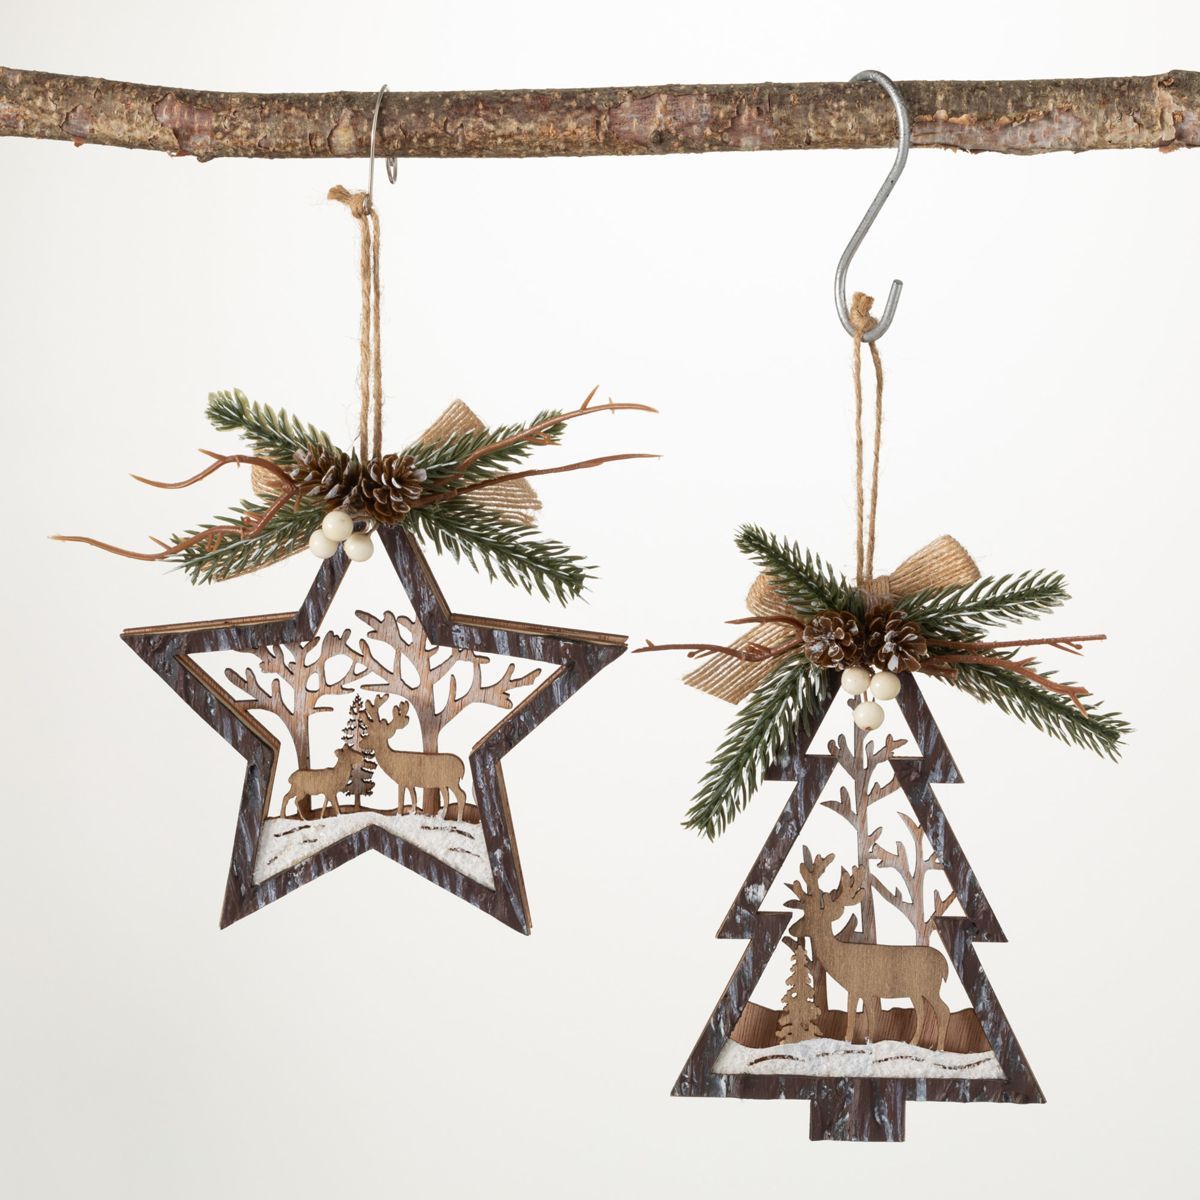 6"H and 5.75"H Sullivans Wood Star And Tree Ornaments; Multicolored Christmas Ornaments | Target